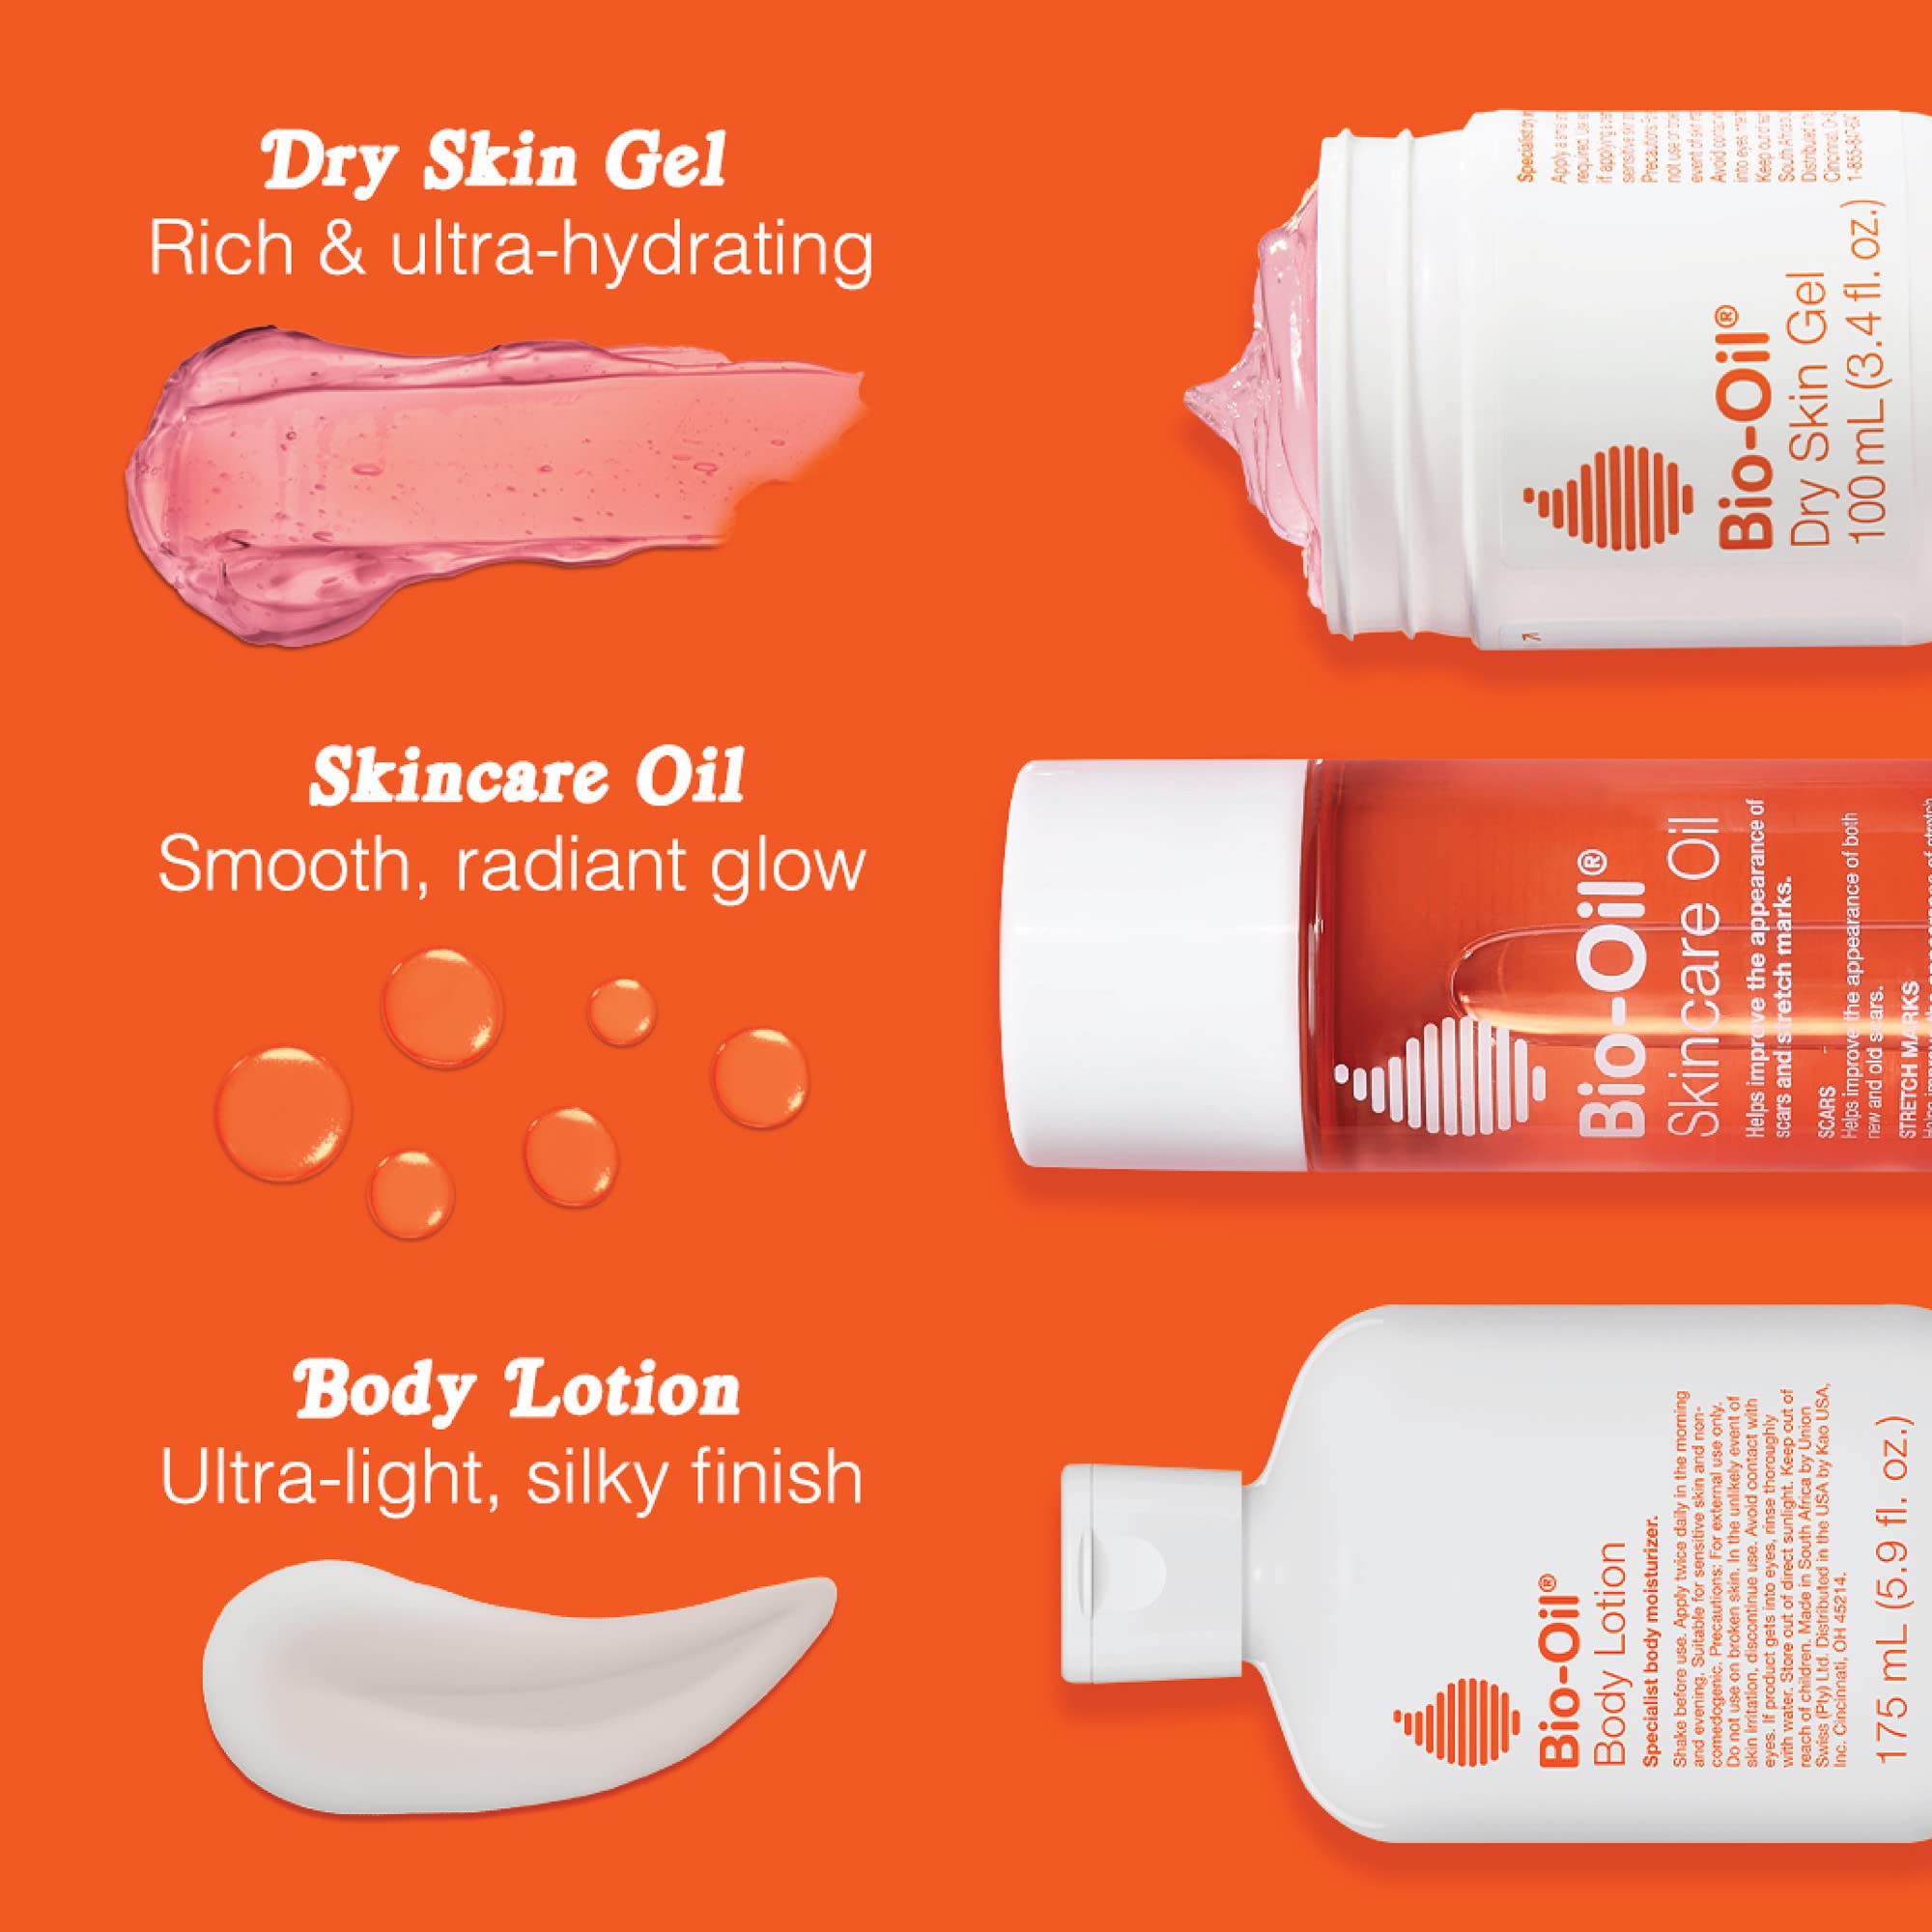 Bio-Oil Skincare Body Oil Serum for Scars and Stretch Marks, Body and Face Moisturizer, Dermatologist Recommended, Non-Comedogenic, Travel Size, For All Skin Types, Vitamin A, E, 0.85 oz, Pack of 3